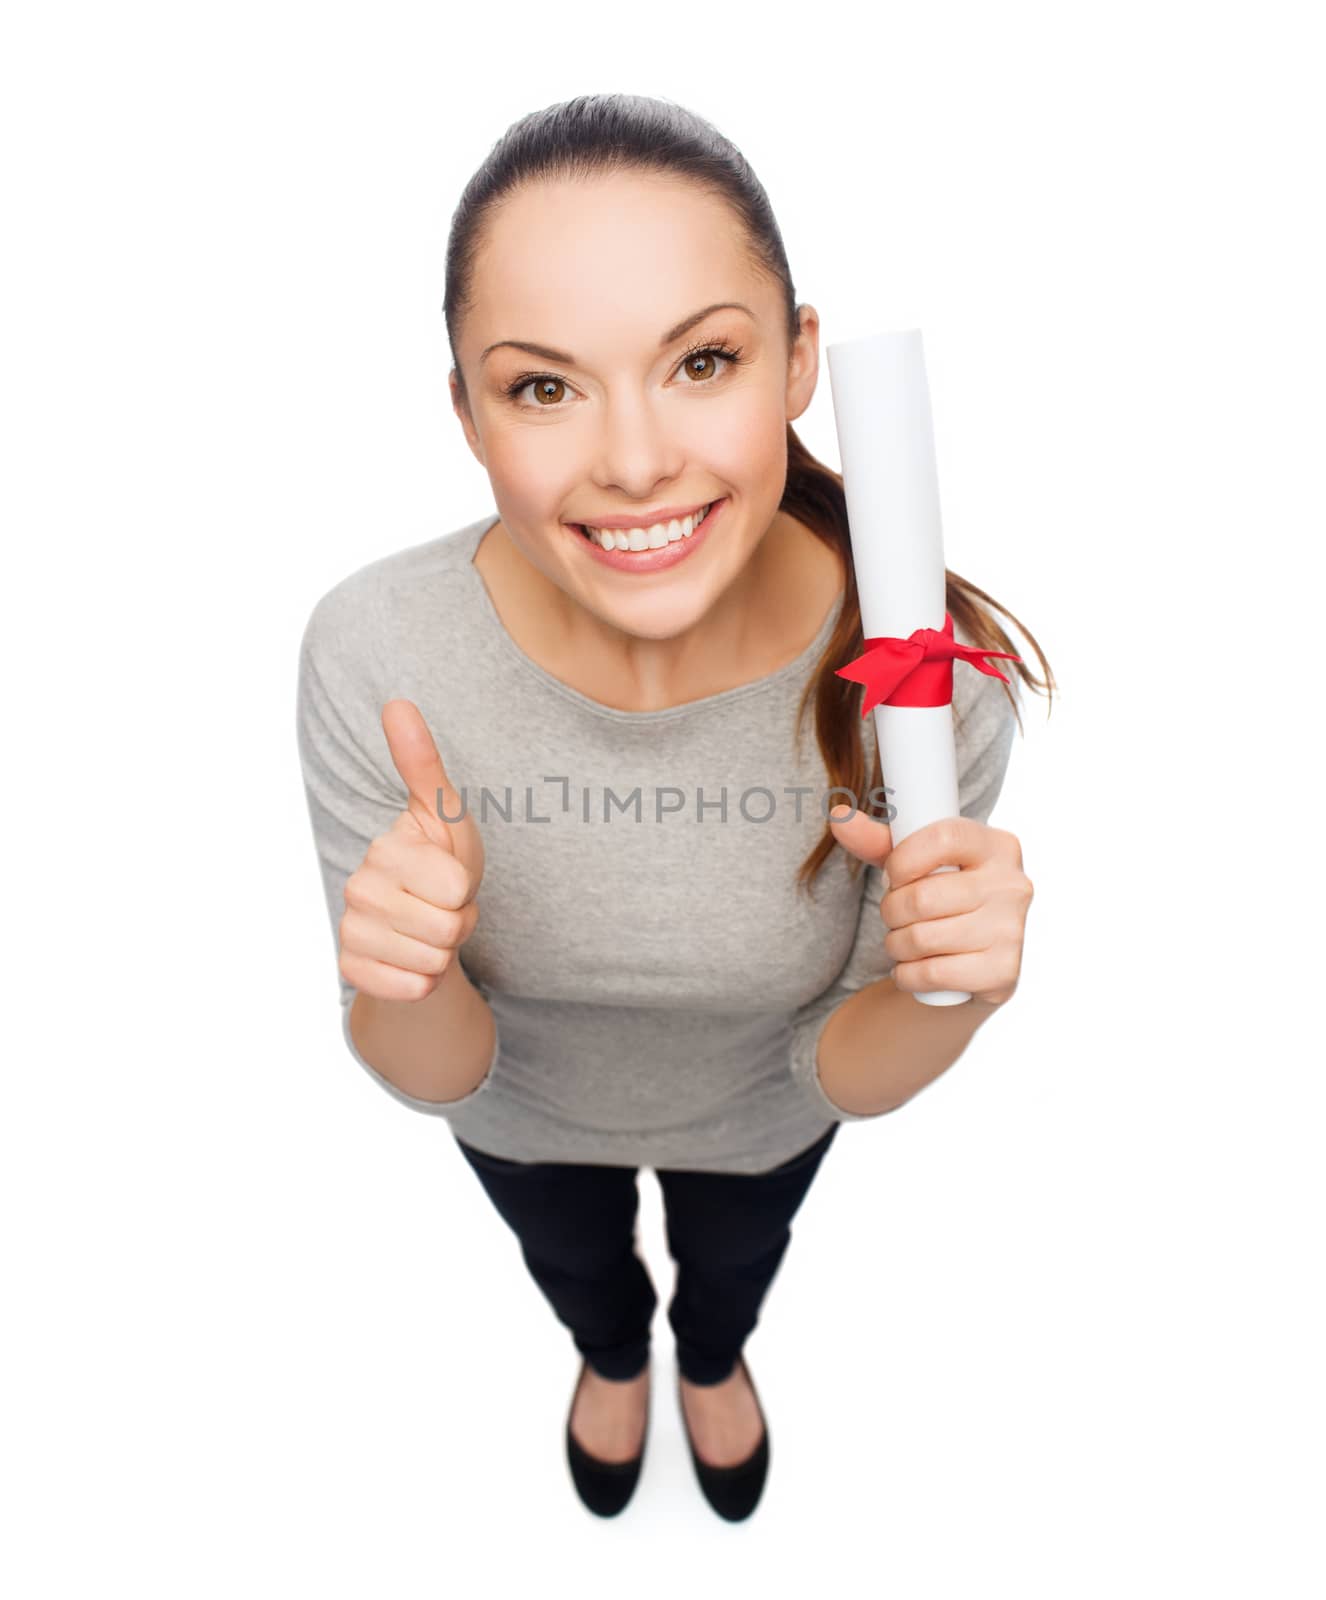 happy woman with diploma showing thumbs up by dolgachov